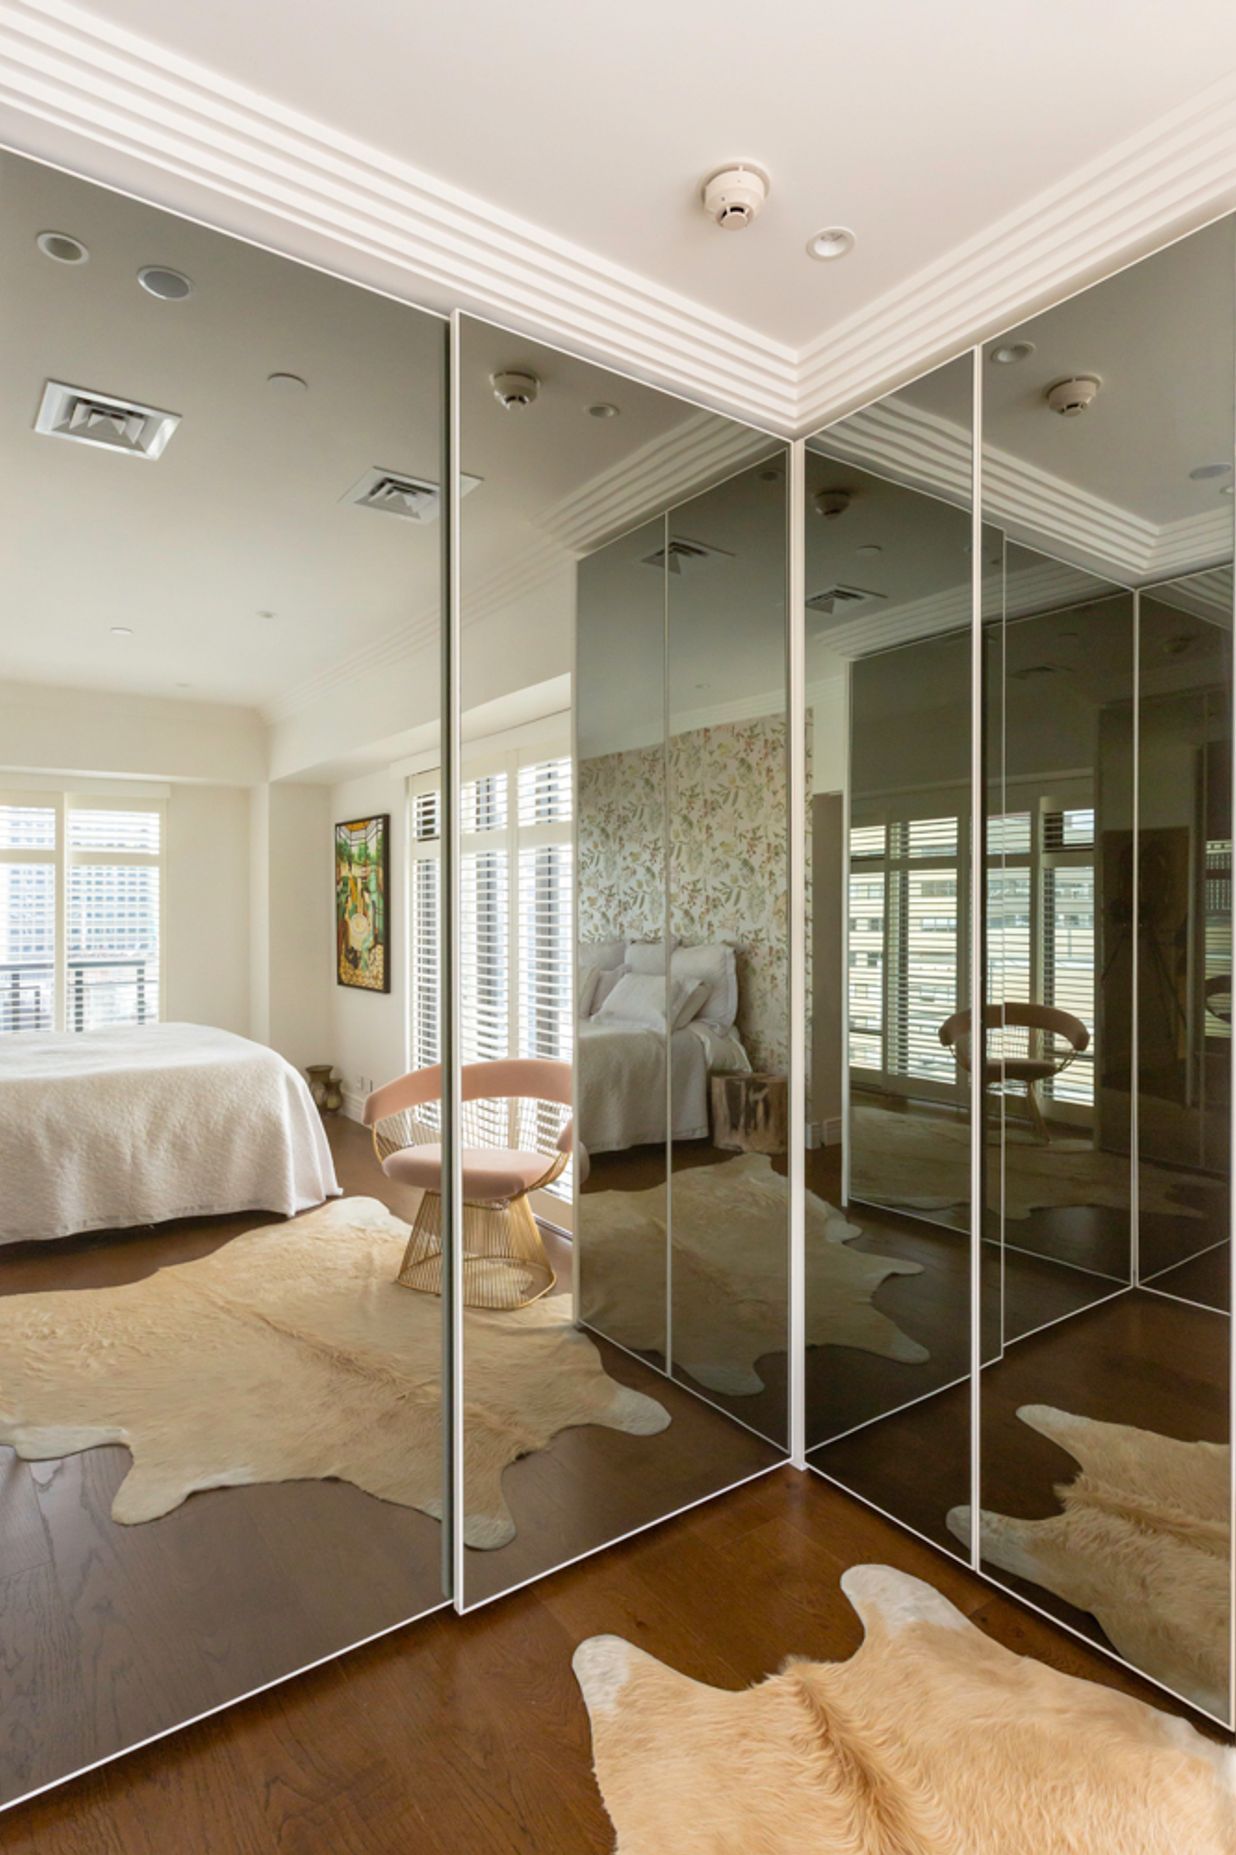 This interior by Stratford Interior Design showcases smokey glass mirrored doors, which contrast nicely against the white frames and traditional mouldings in this apartment: "This was in a very small apartment and  having that dark mirror on the wardrobes really created the illusion of space," says Gina.